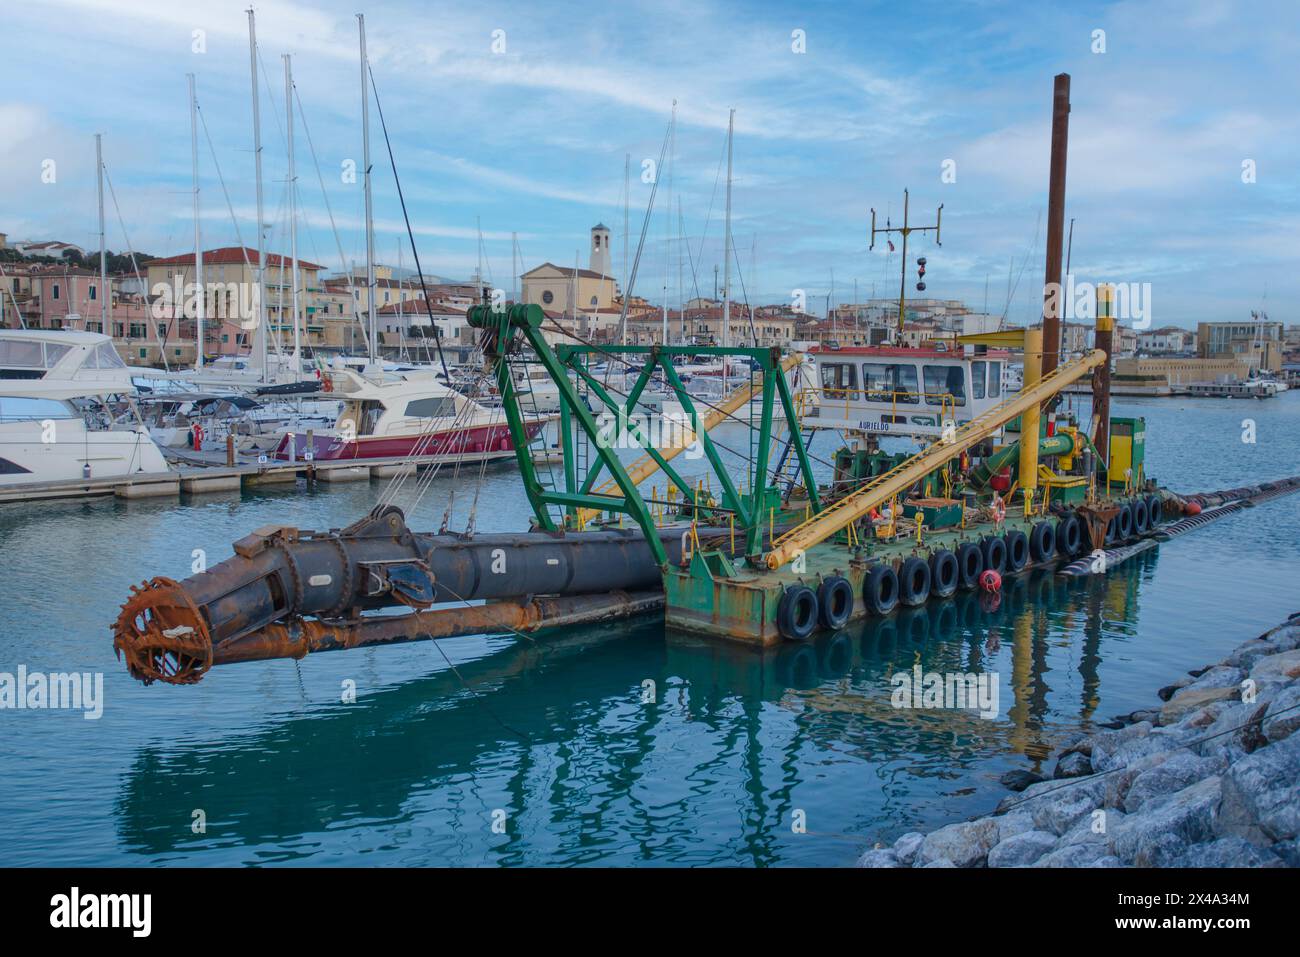 Seabed dredger in the tourist port of San Vincenzo, Tuscany, Italy Stock Photo